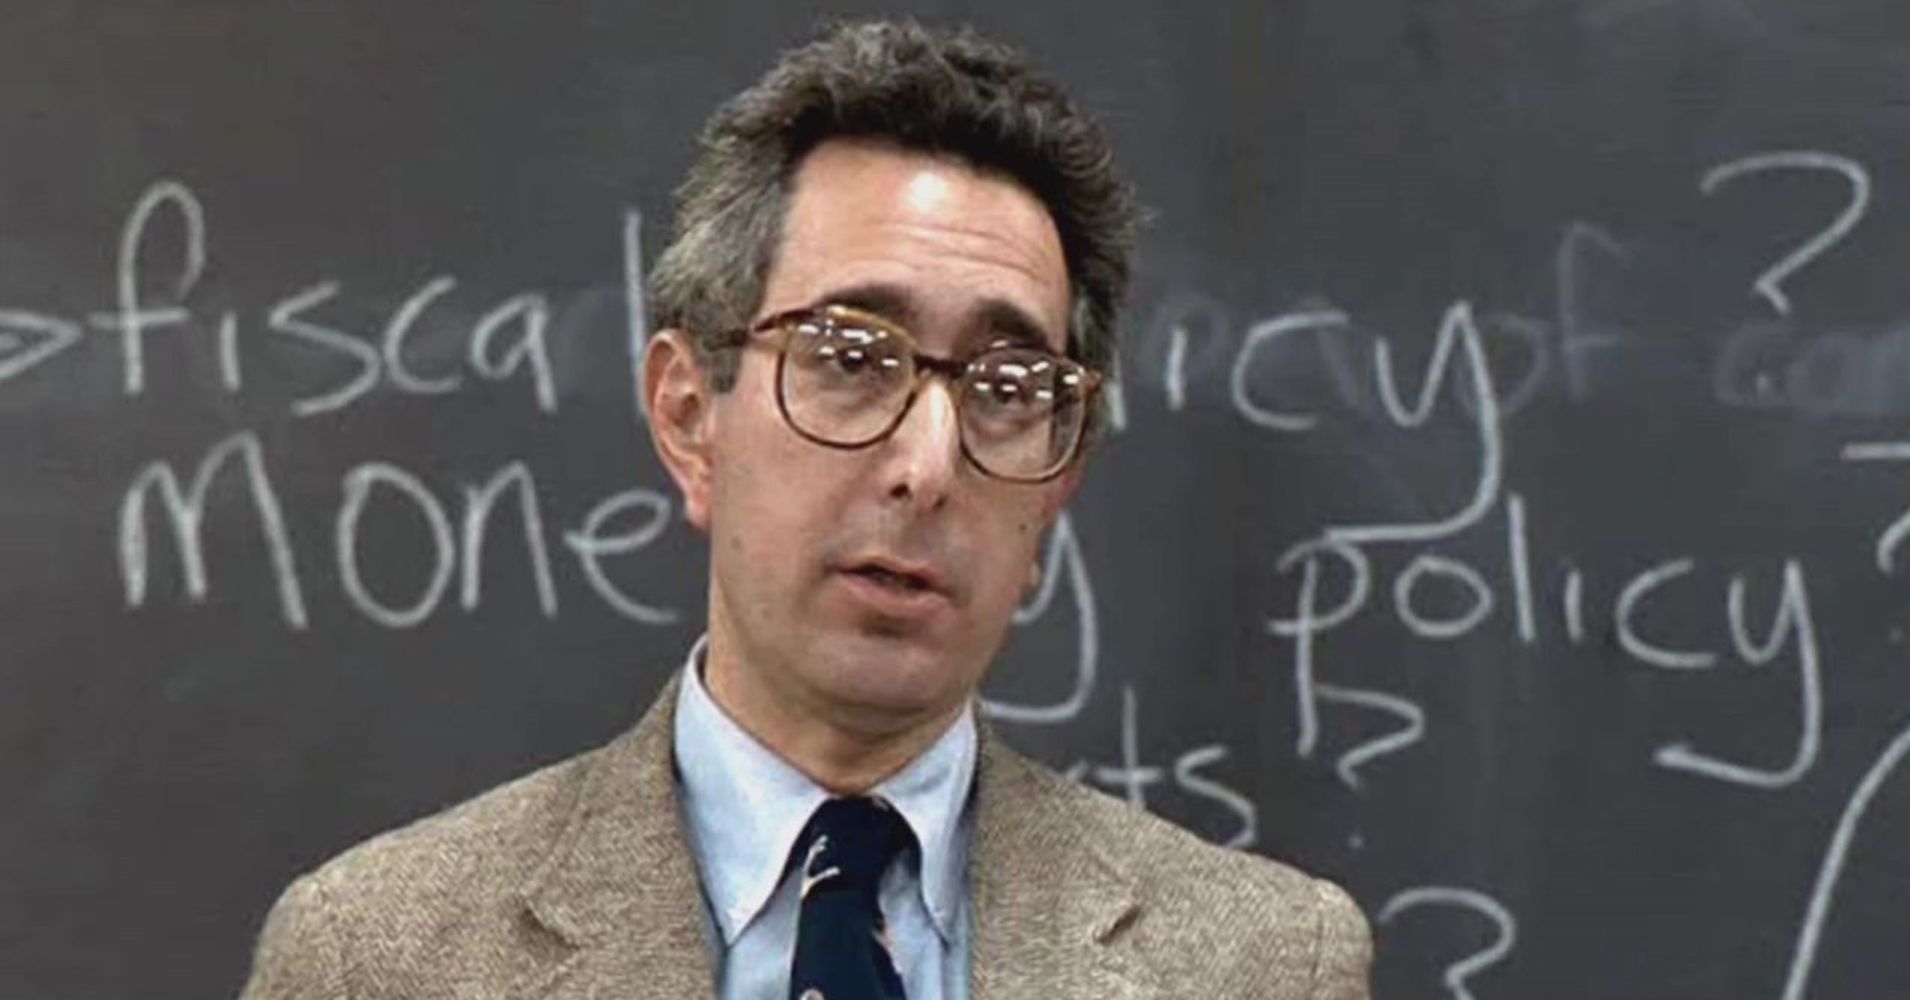 Image of the teacher from the movie Ferris Beuller's Day Off.